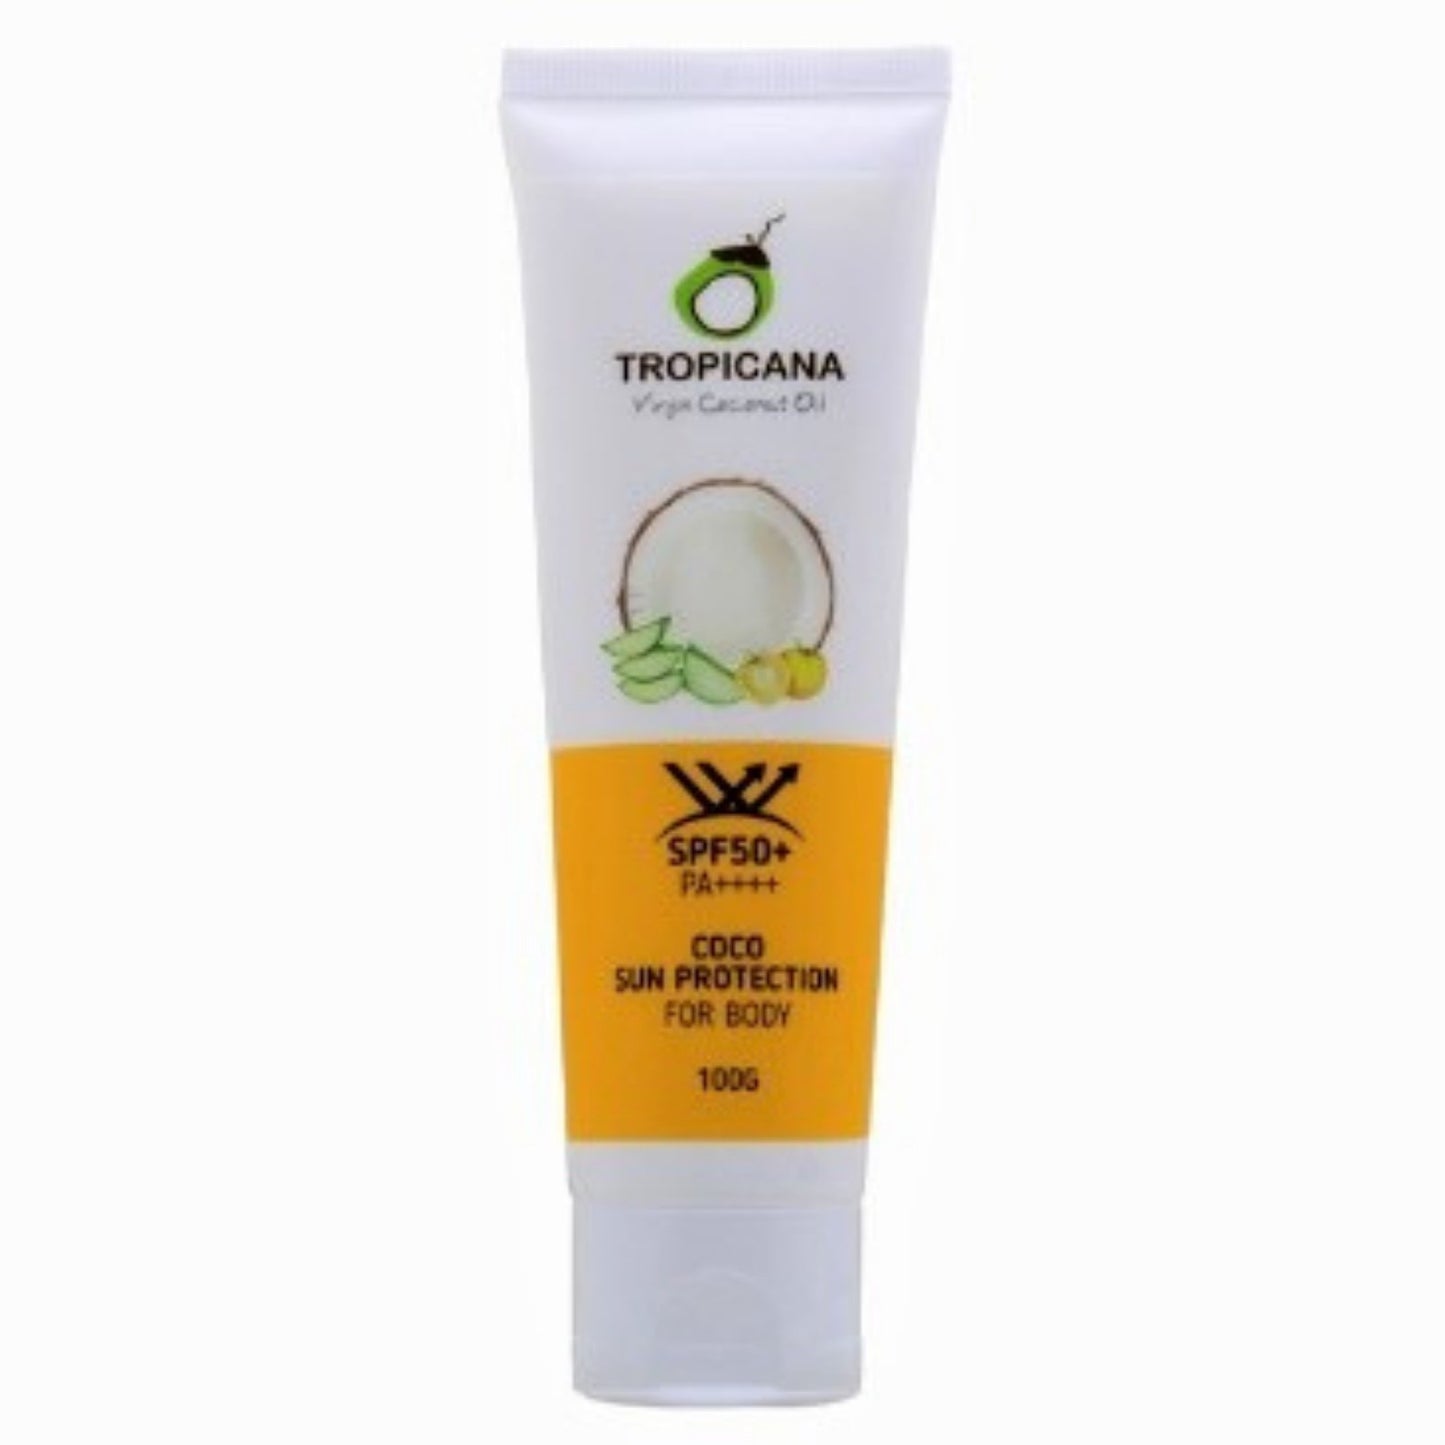 Coco Sun Protection Lotion For Body 100g [ 21 OCT 2020] - WERONE